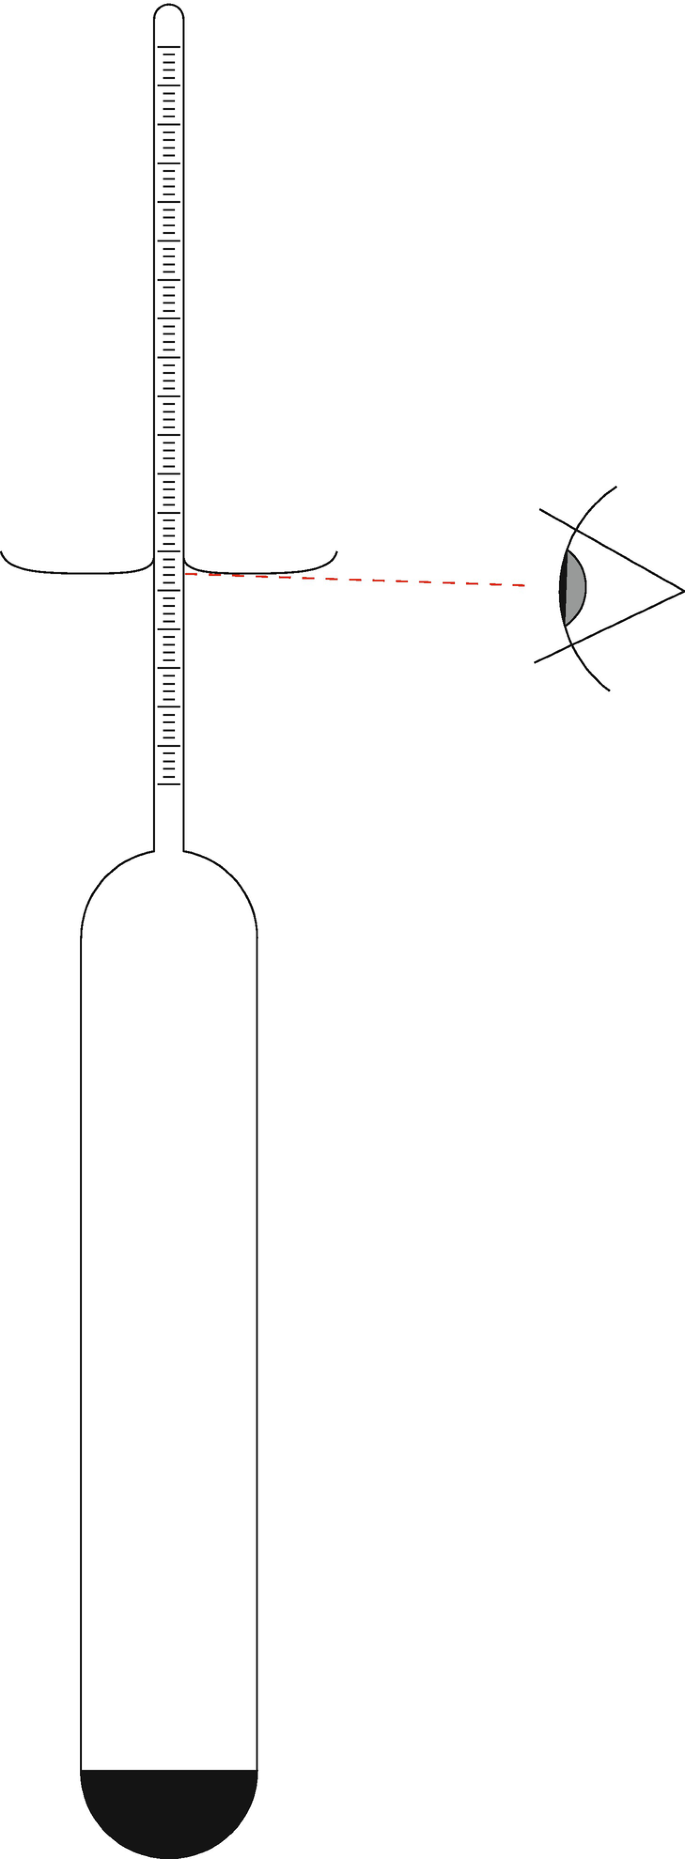 Can anyone attest to the accuracy of this hydrometer and